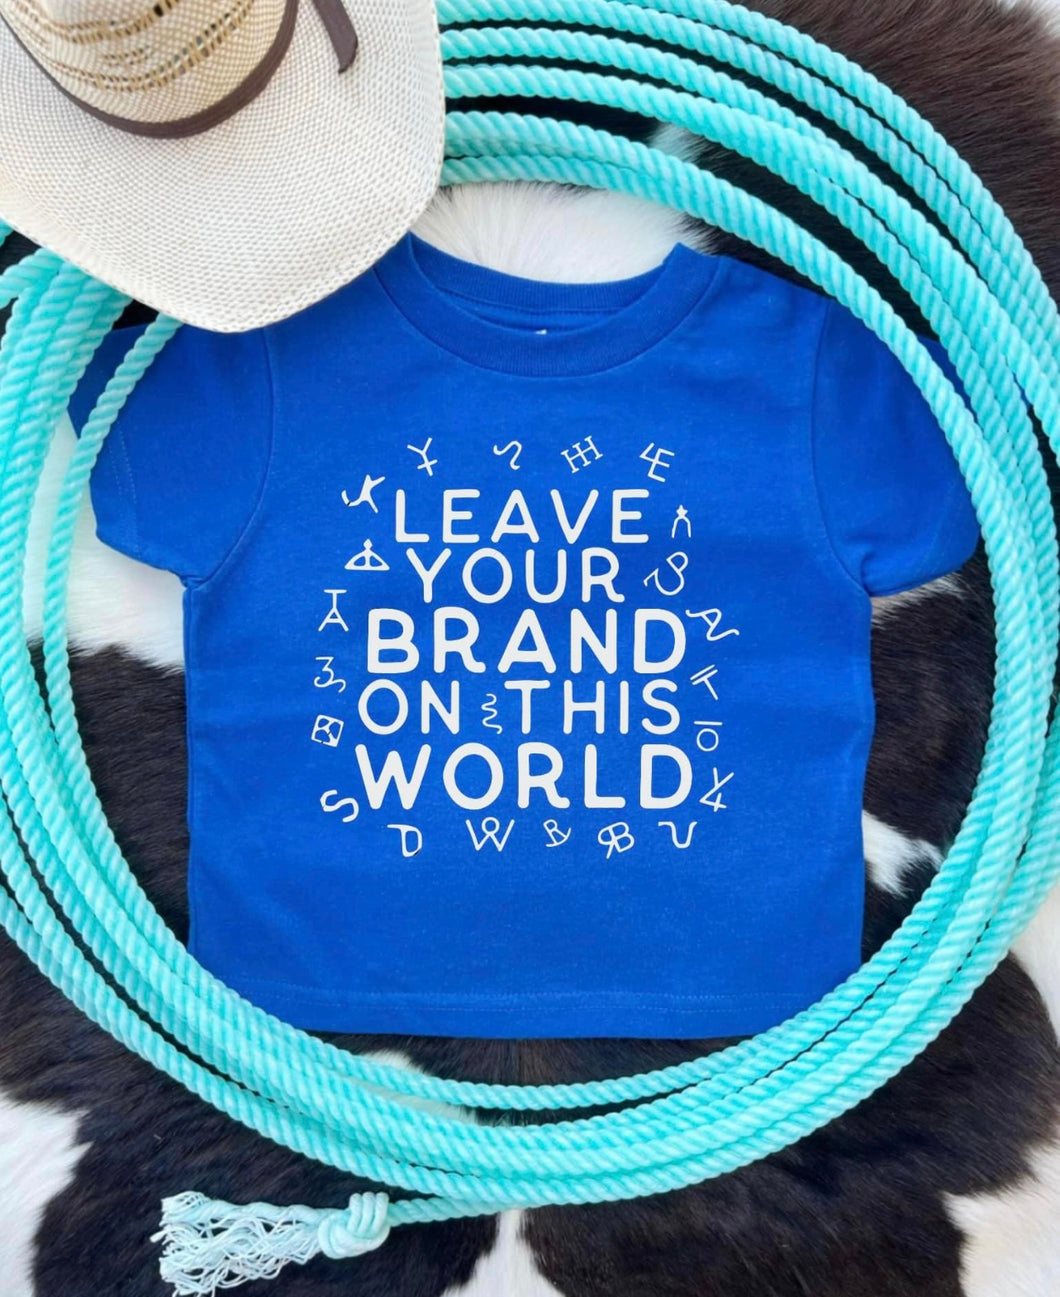 Leave your brand on this world kids tee